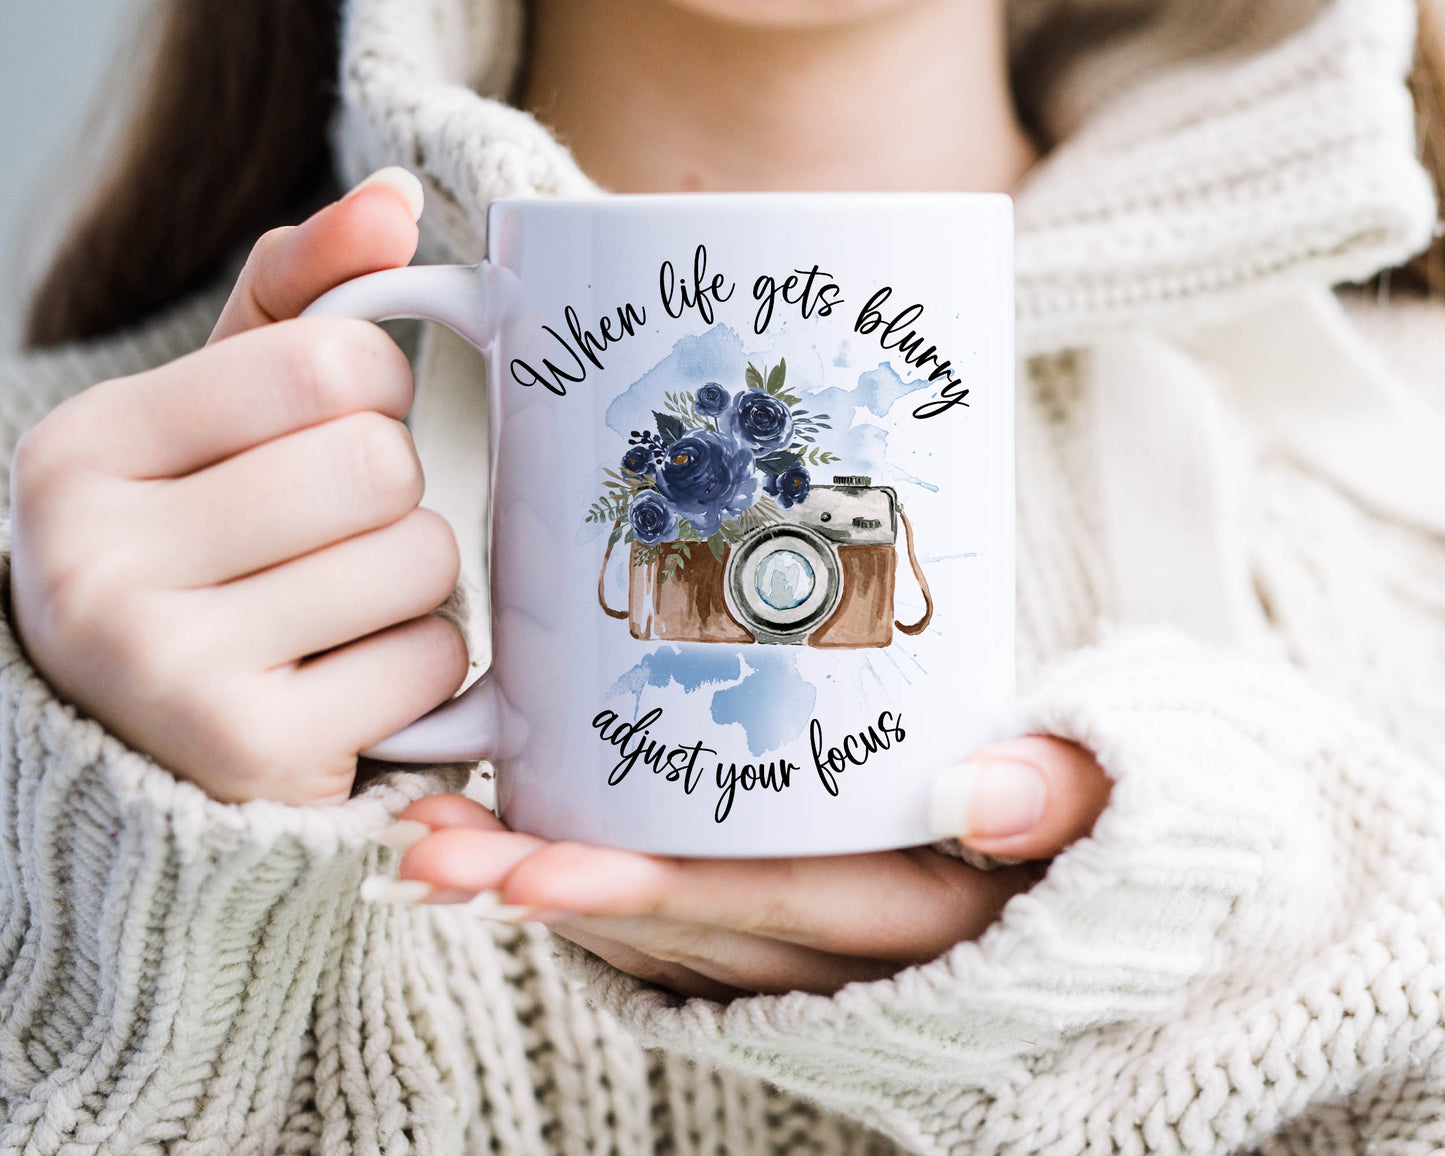 Retro camera design with blue flowers on a blue watercolour splash with the text 'When life gets blurry, adjust your focus'